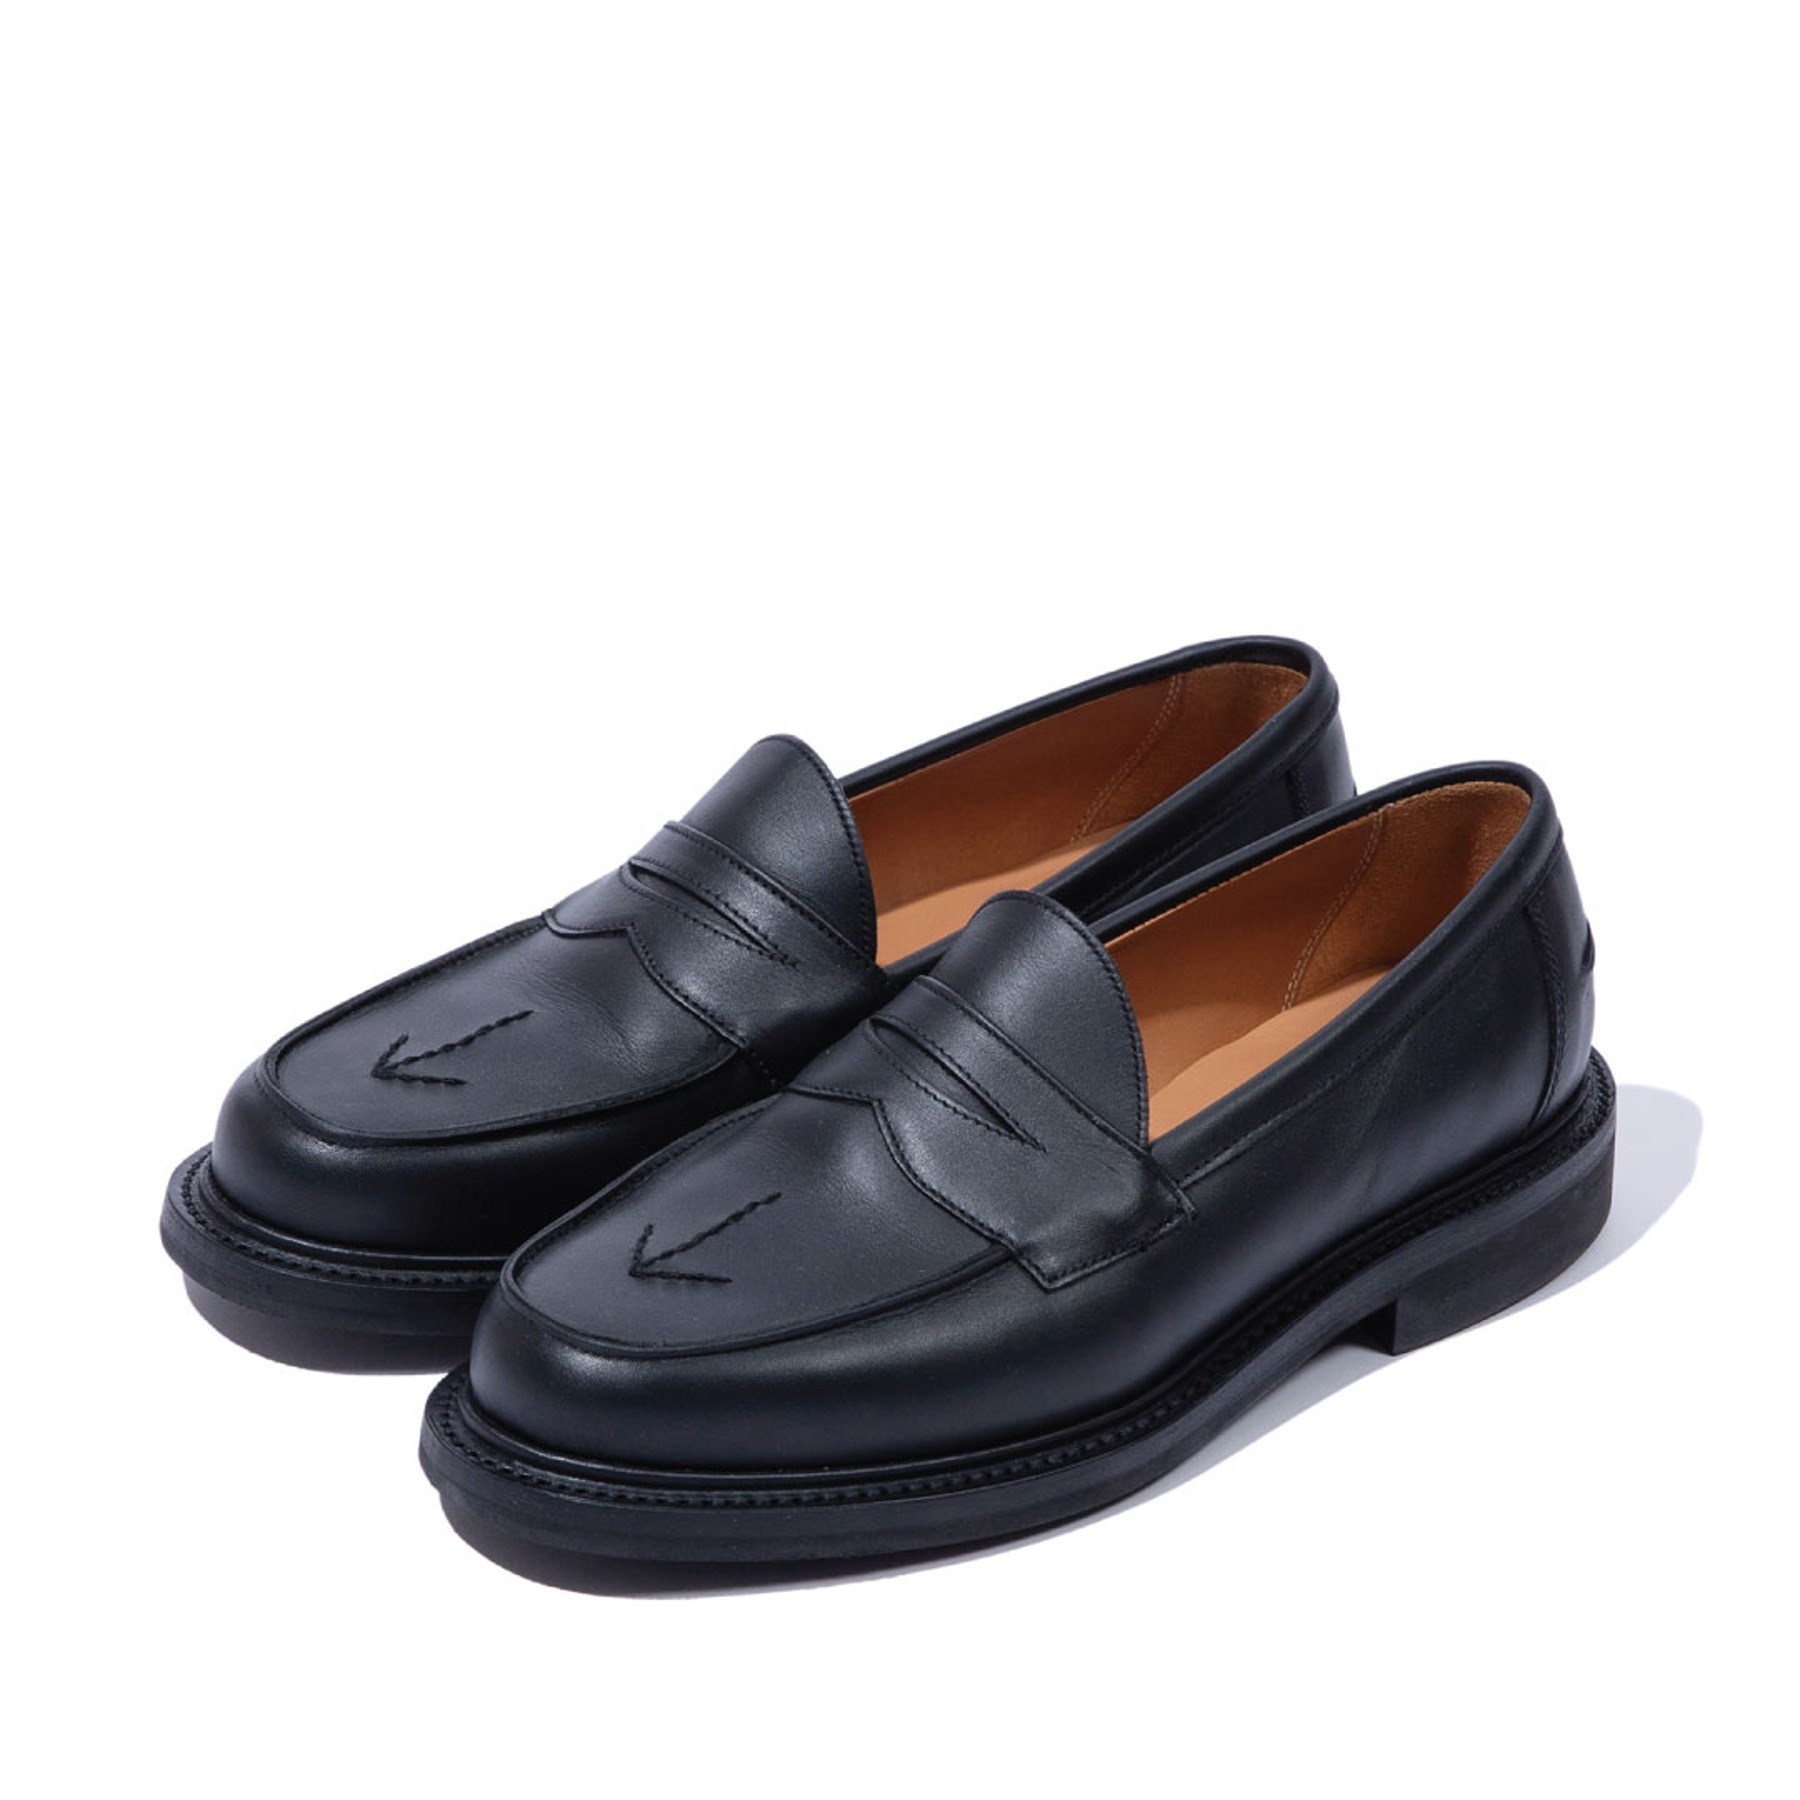 PENNY LOAFER - BLACK WAXY LEATHER with BLACK ARROW